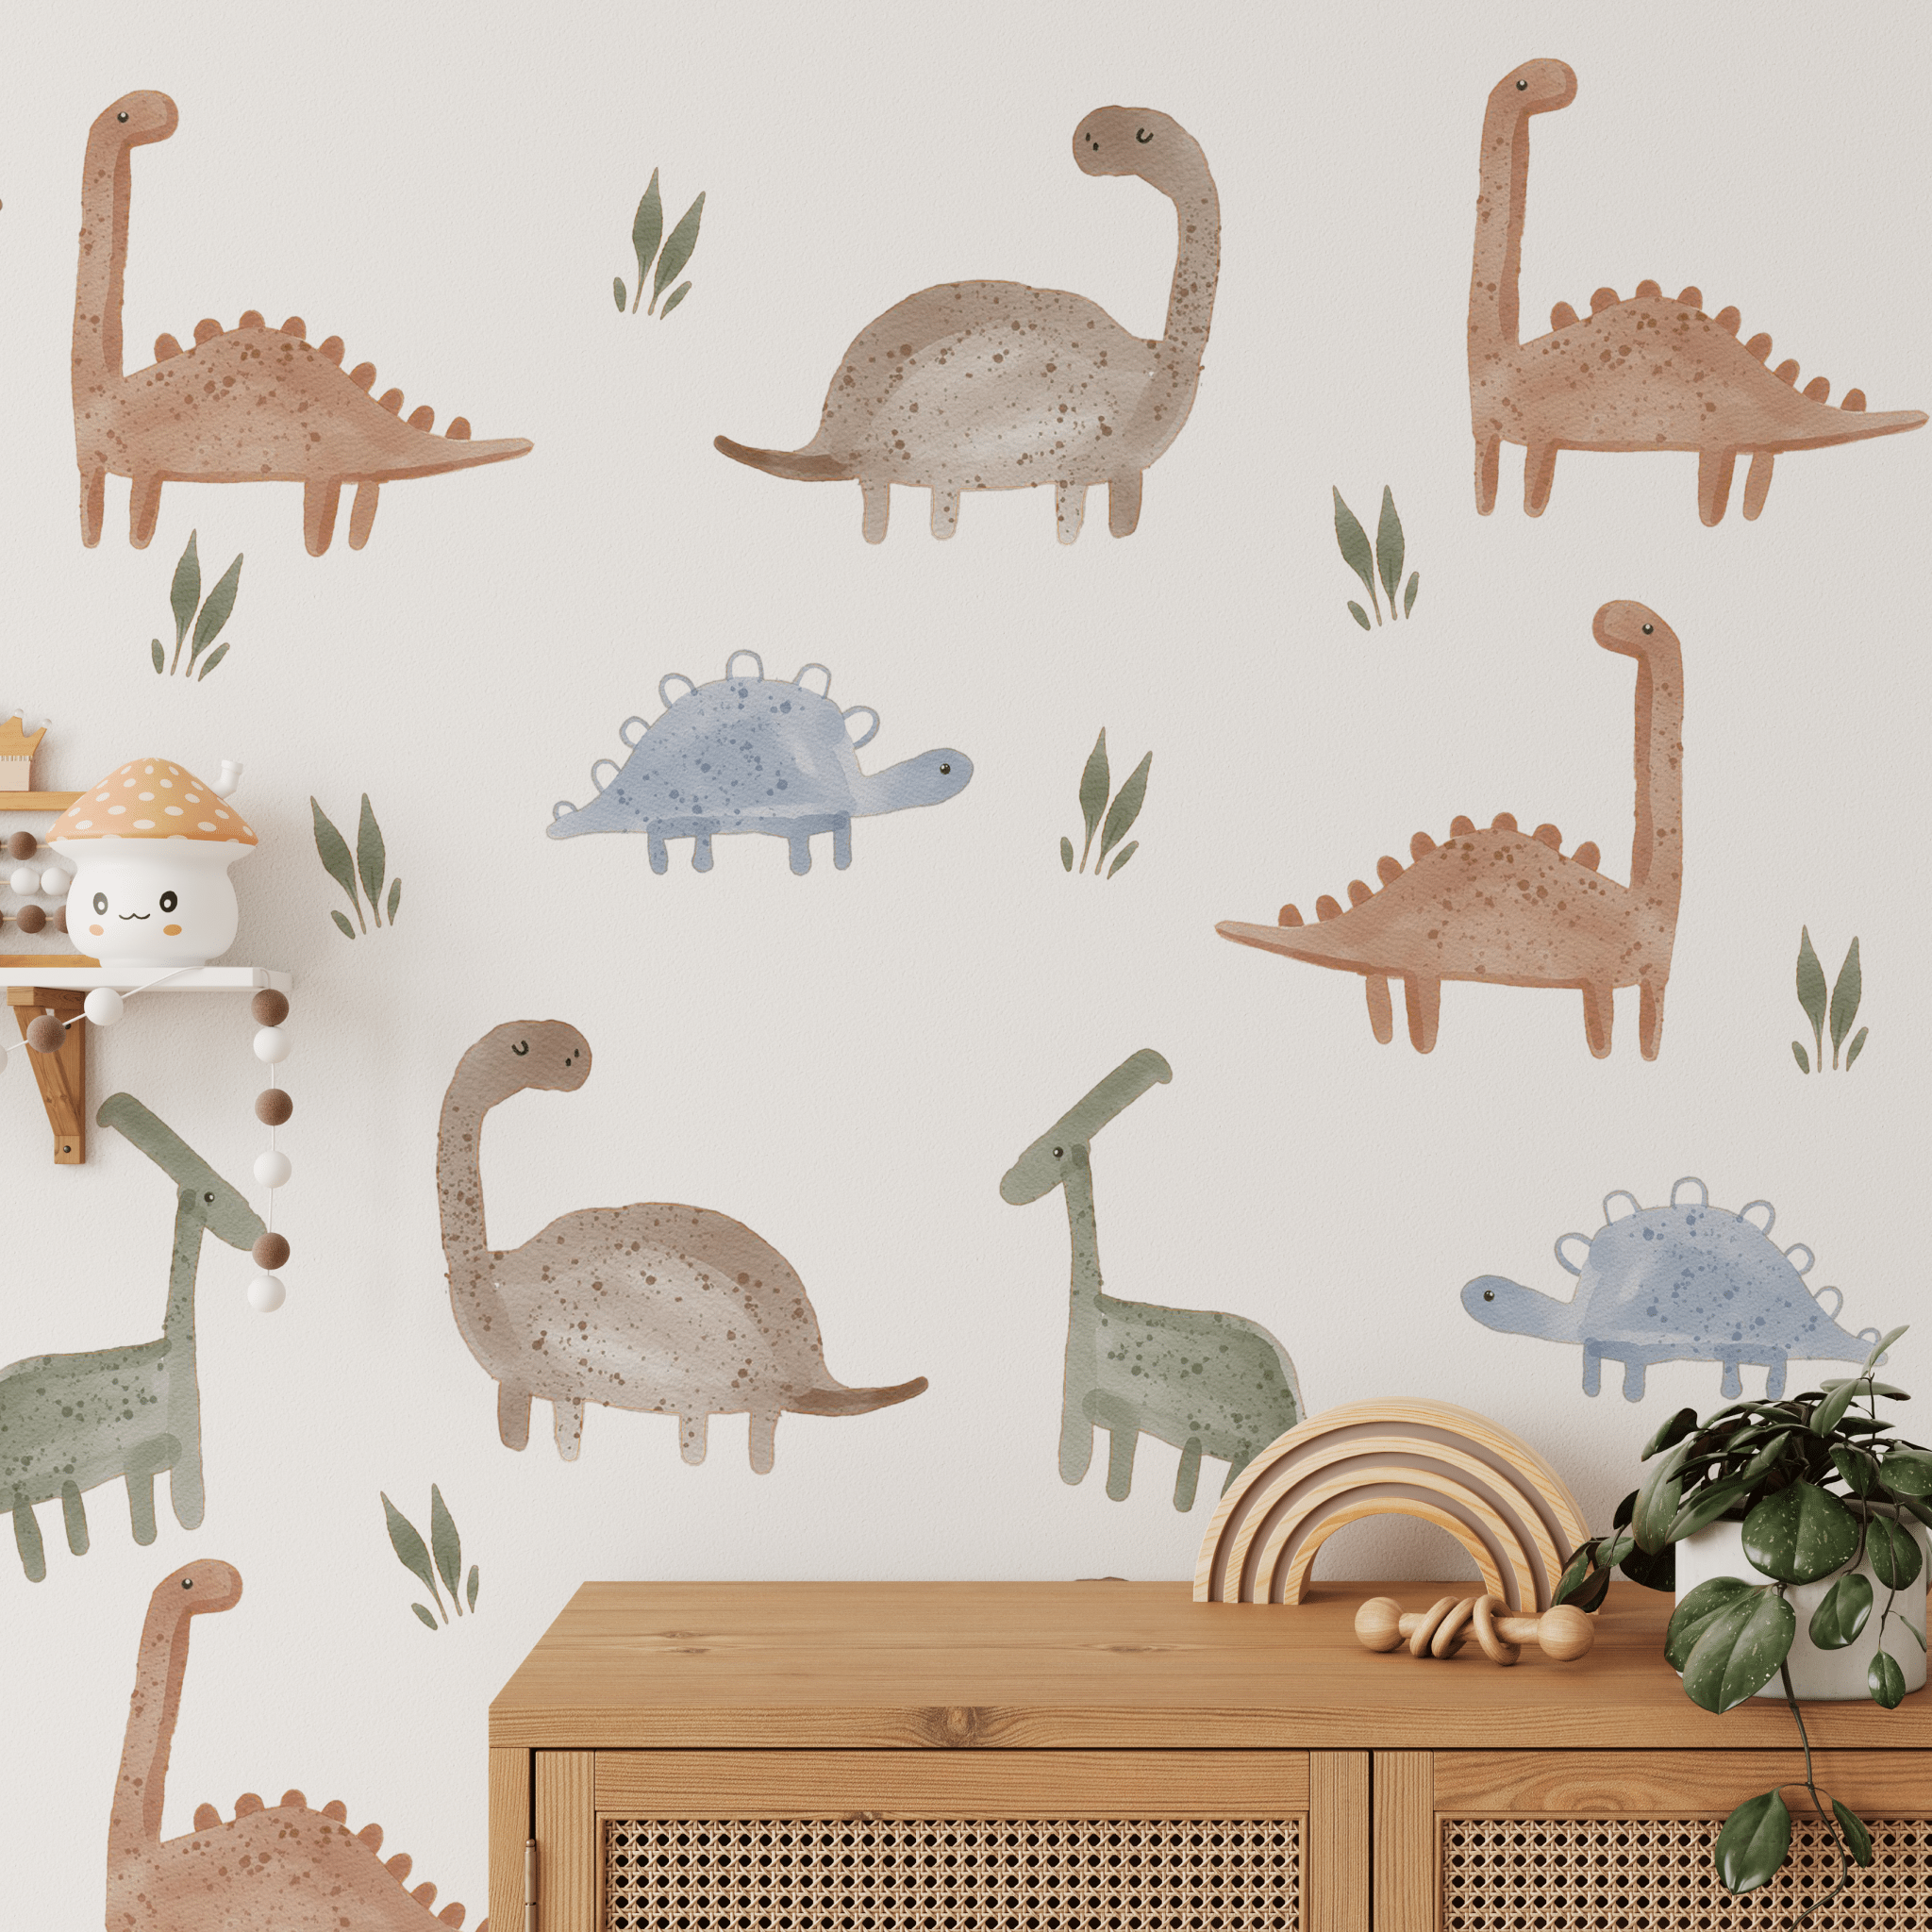 Removable dinosaurs for a child's wall in neutral watercolor